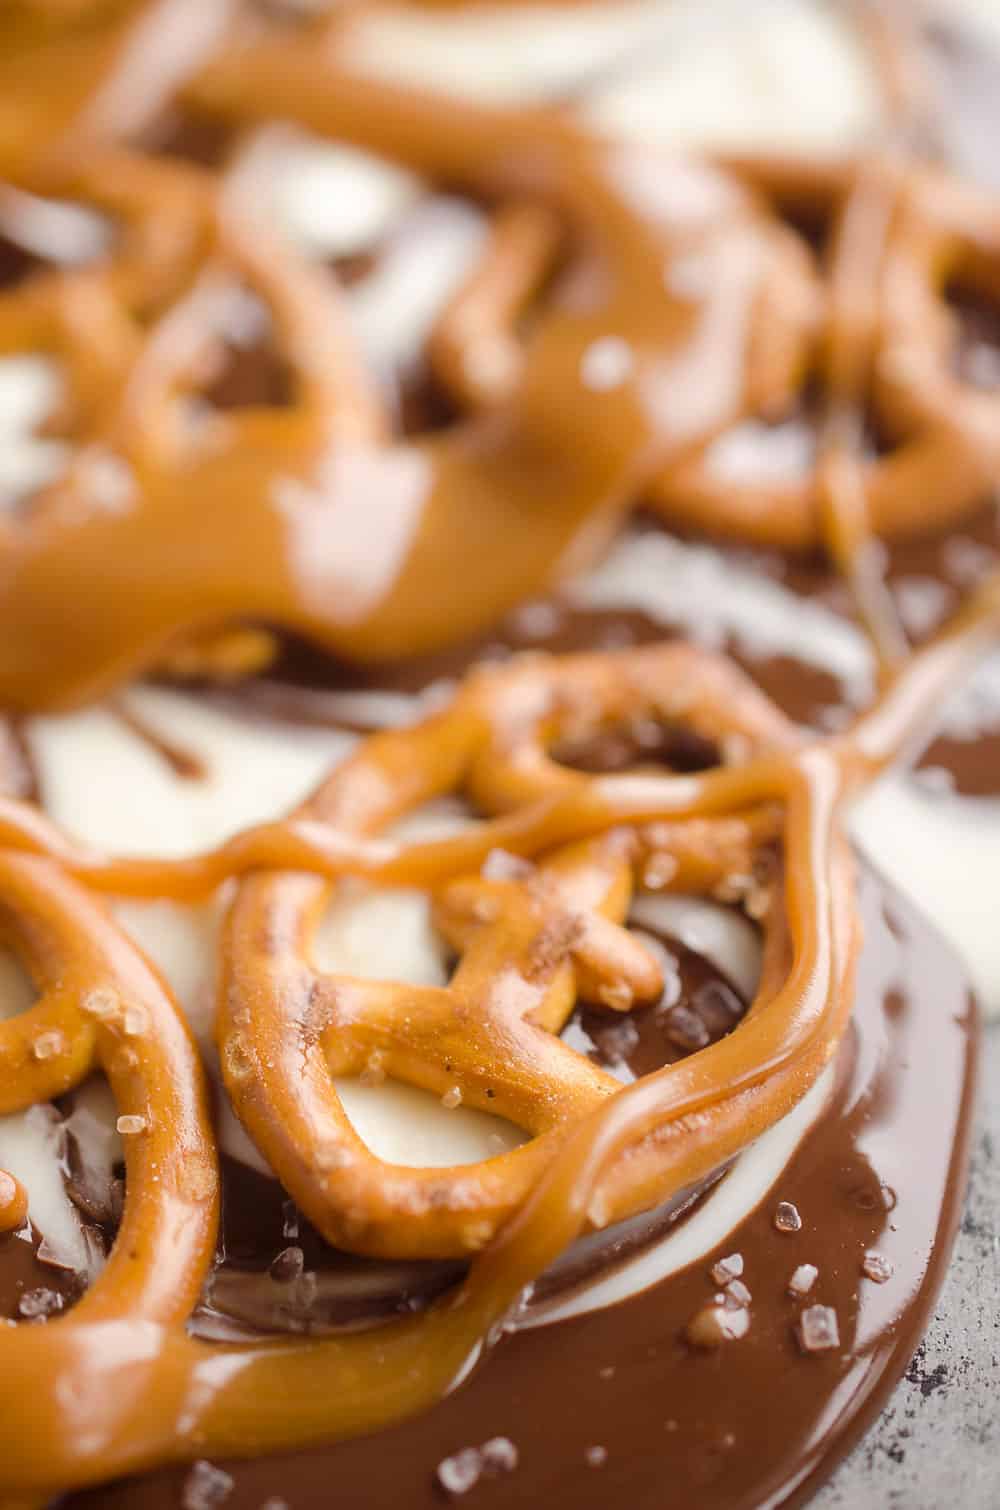 Salted Caramel & Pretzel Chocolate Bark is an easy and delicious sweet & salty dessert to add to your next party snack table! It's perfect for a game day sweet while watching football or a holiday treat. 